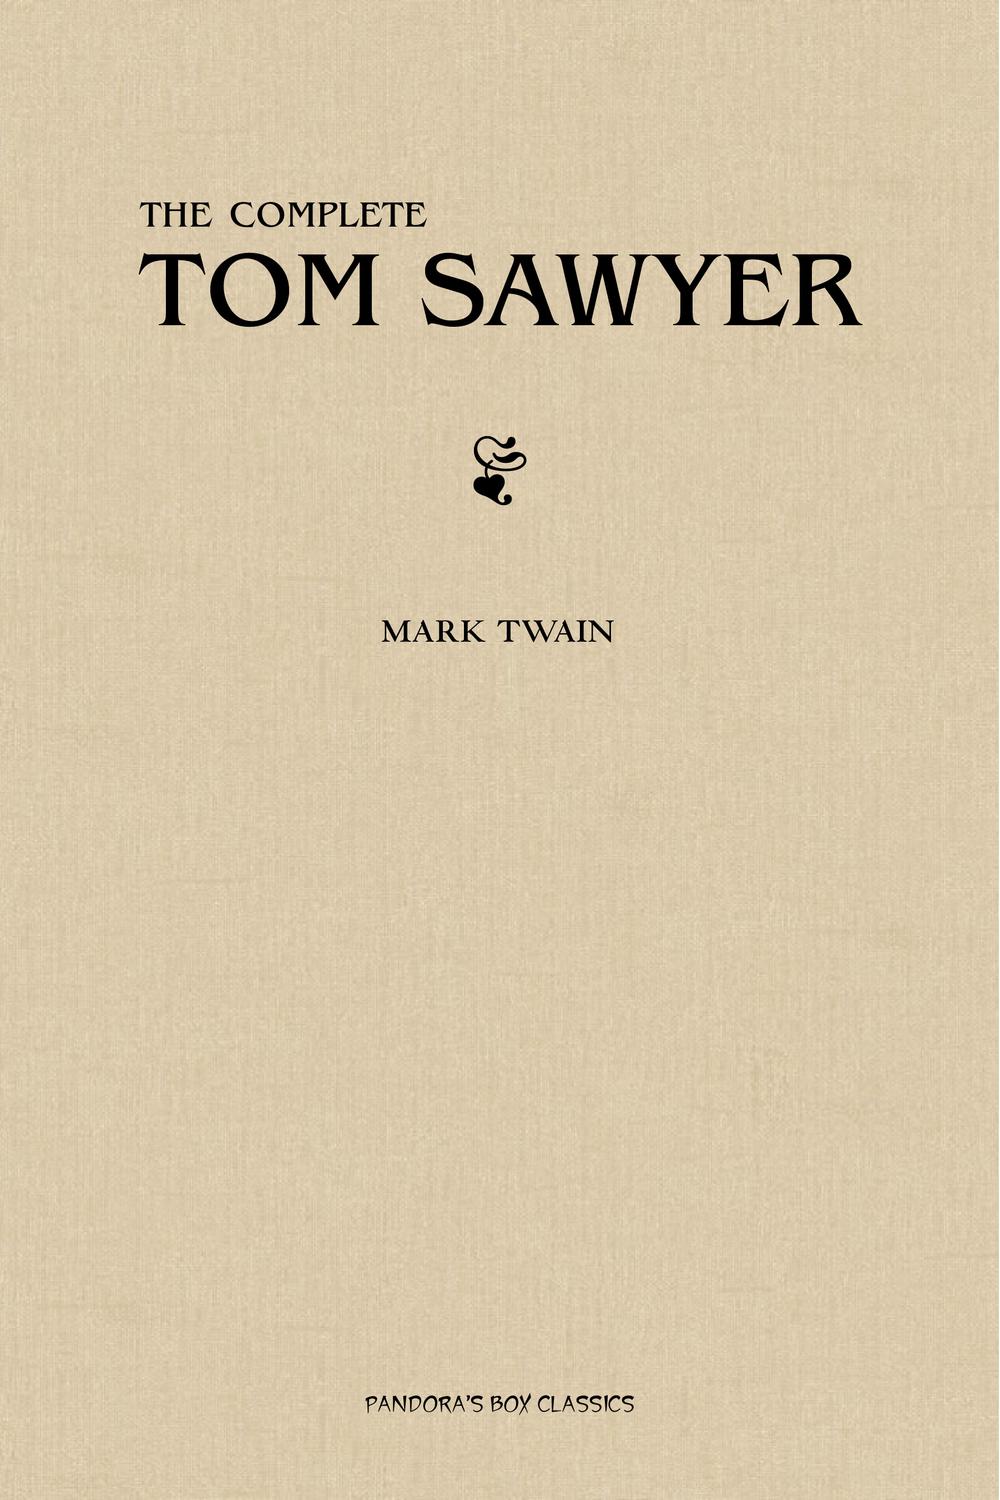 Tom Sawyer: The Complete Collection (The Greatest Fictional Characters of All Time) - Mark Twain